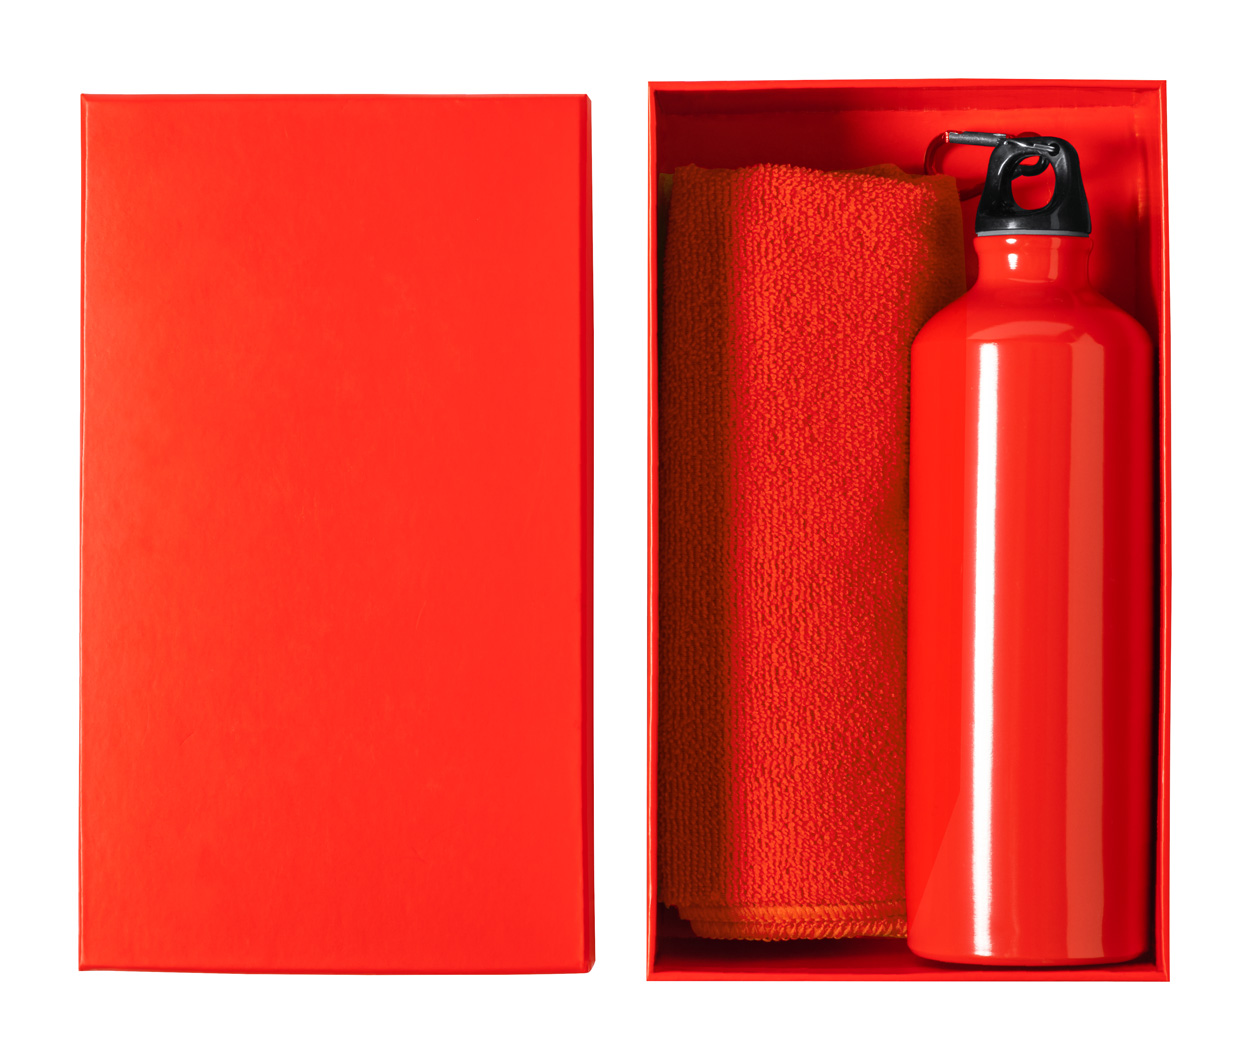 Cloister sports bottle and towel set - red